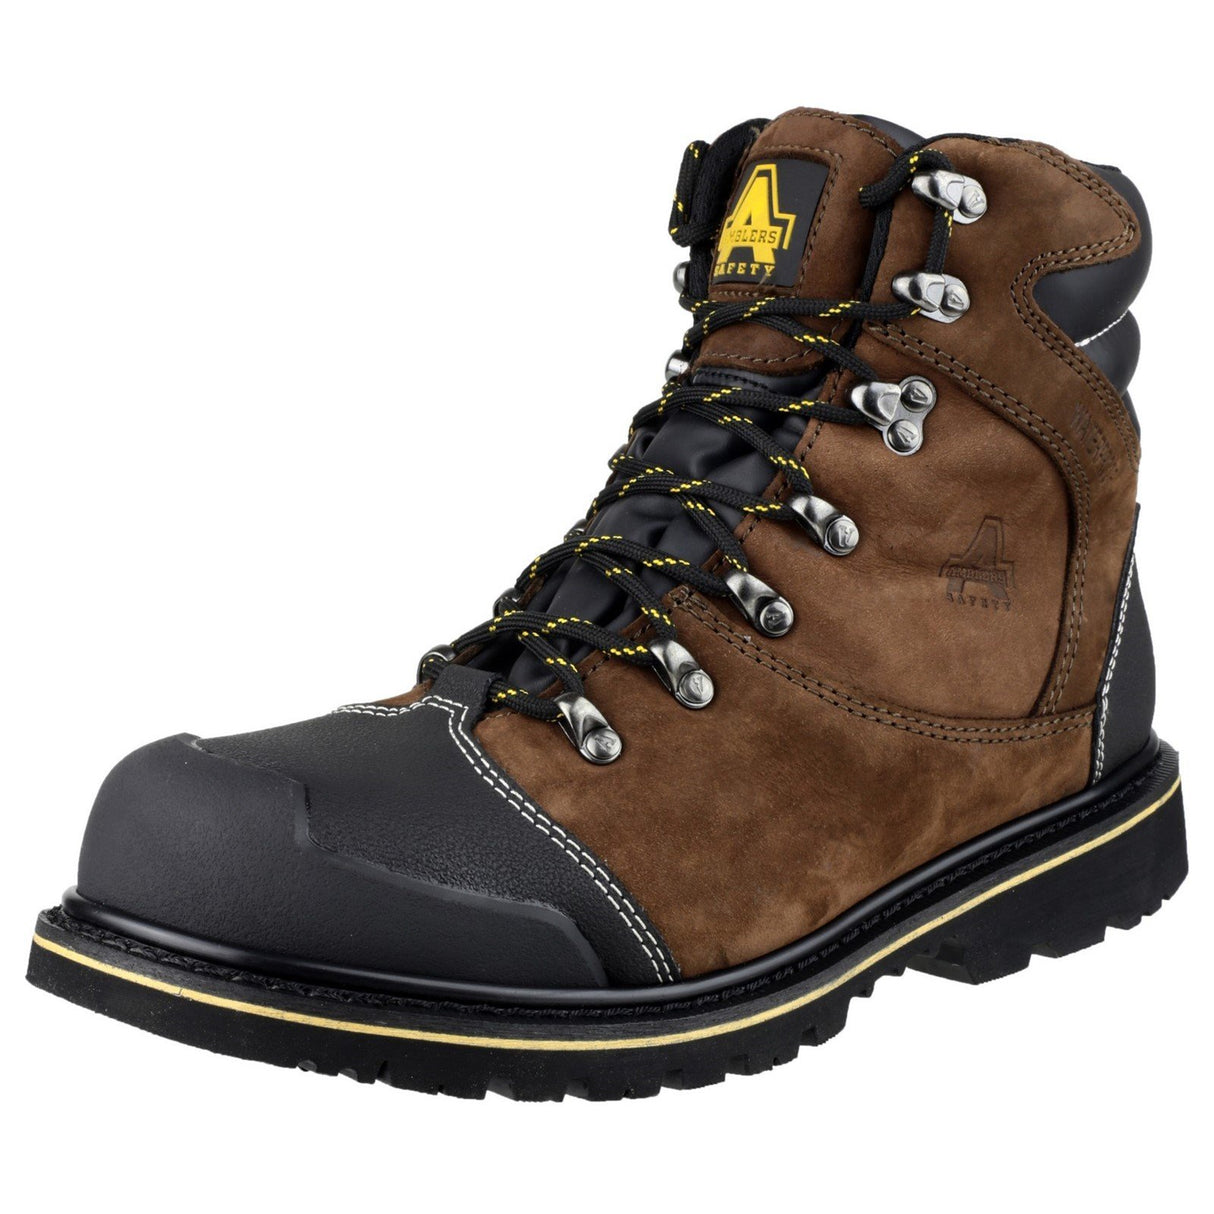 Amblers Safety Goodyear Welted Waterproof Lace Up Industrial Safety Boots